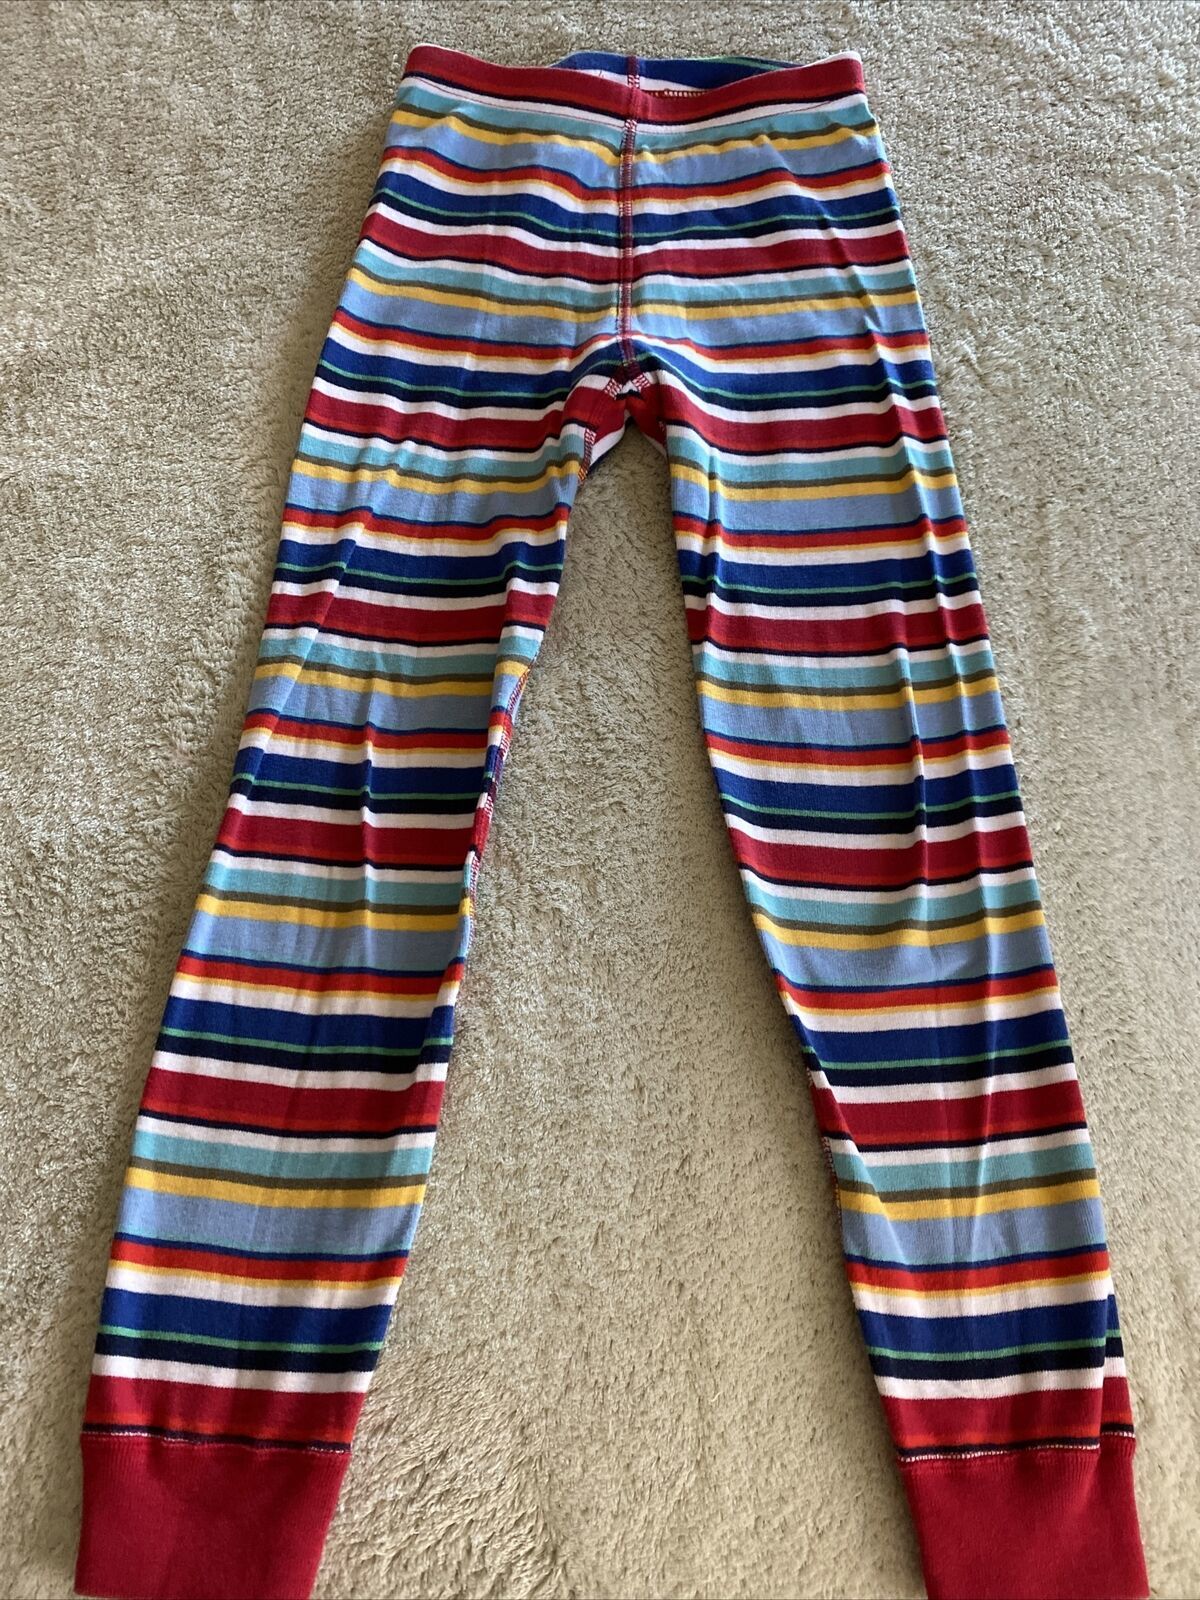 Hanna Andersson Boys Red Blue Green Yellow Striped Snug Fit Pajama Pants 6-7 - $12.25